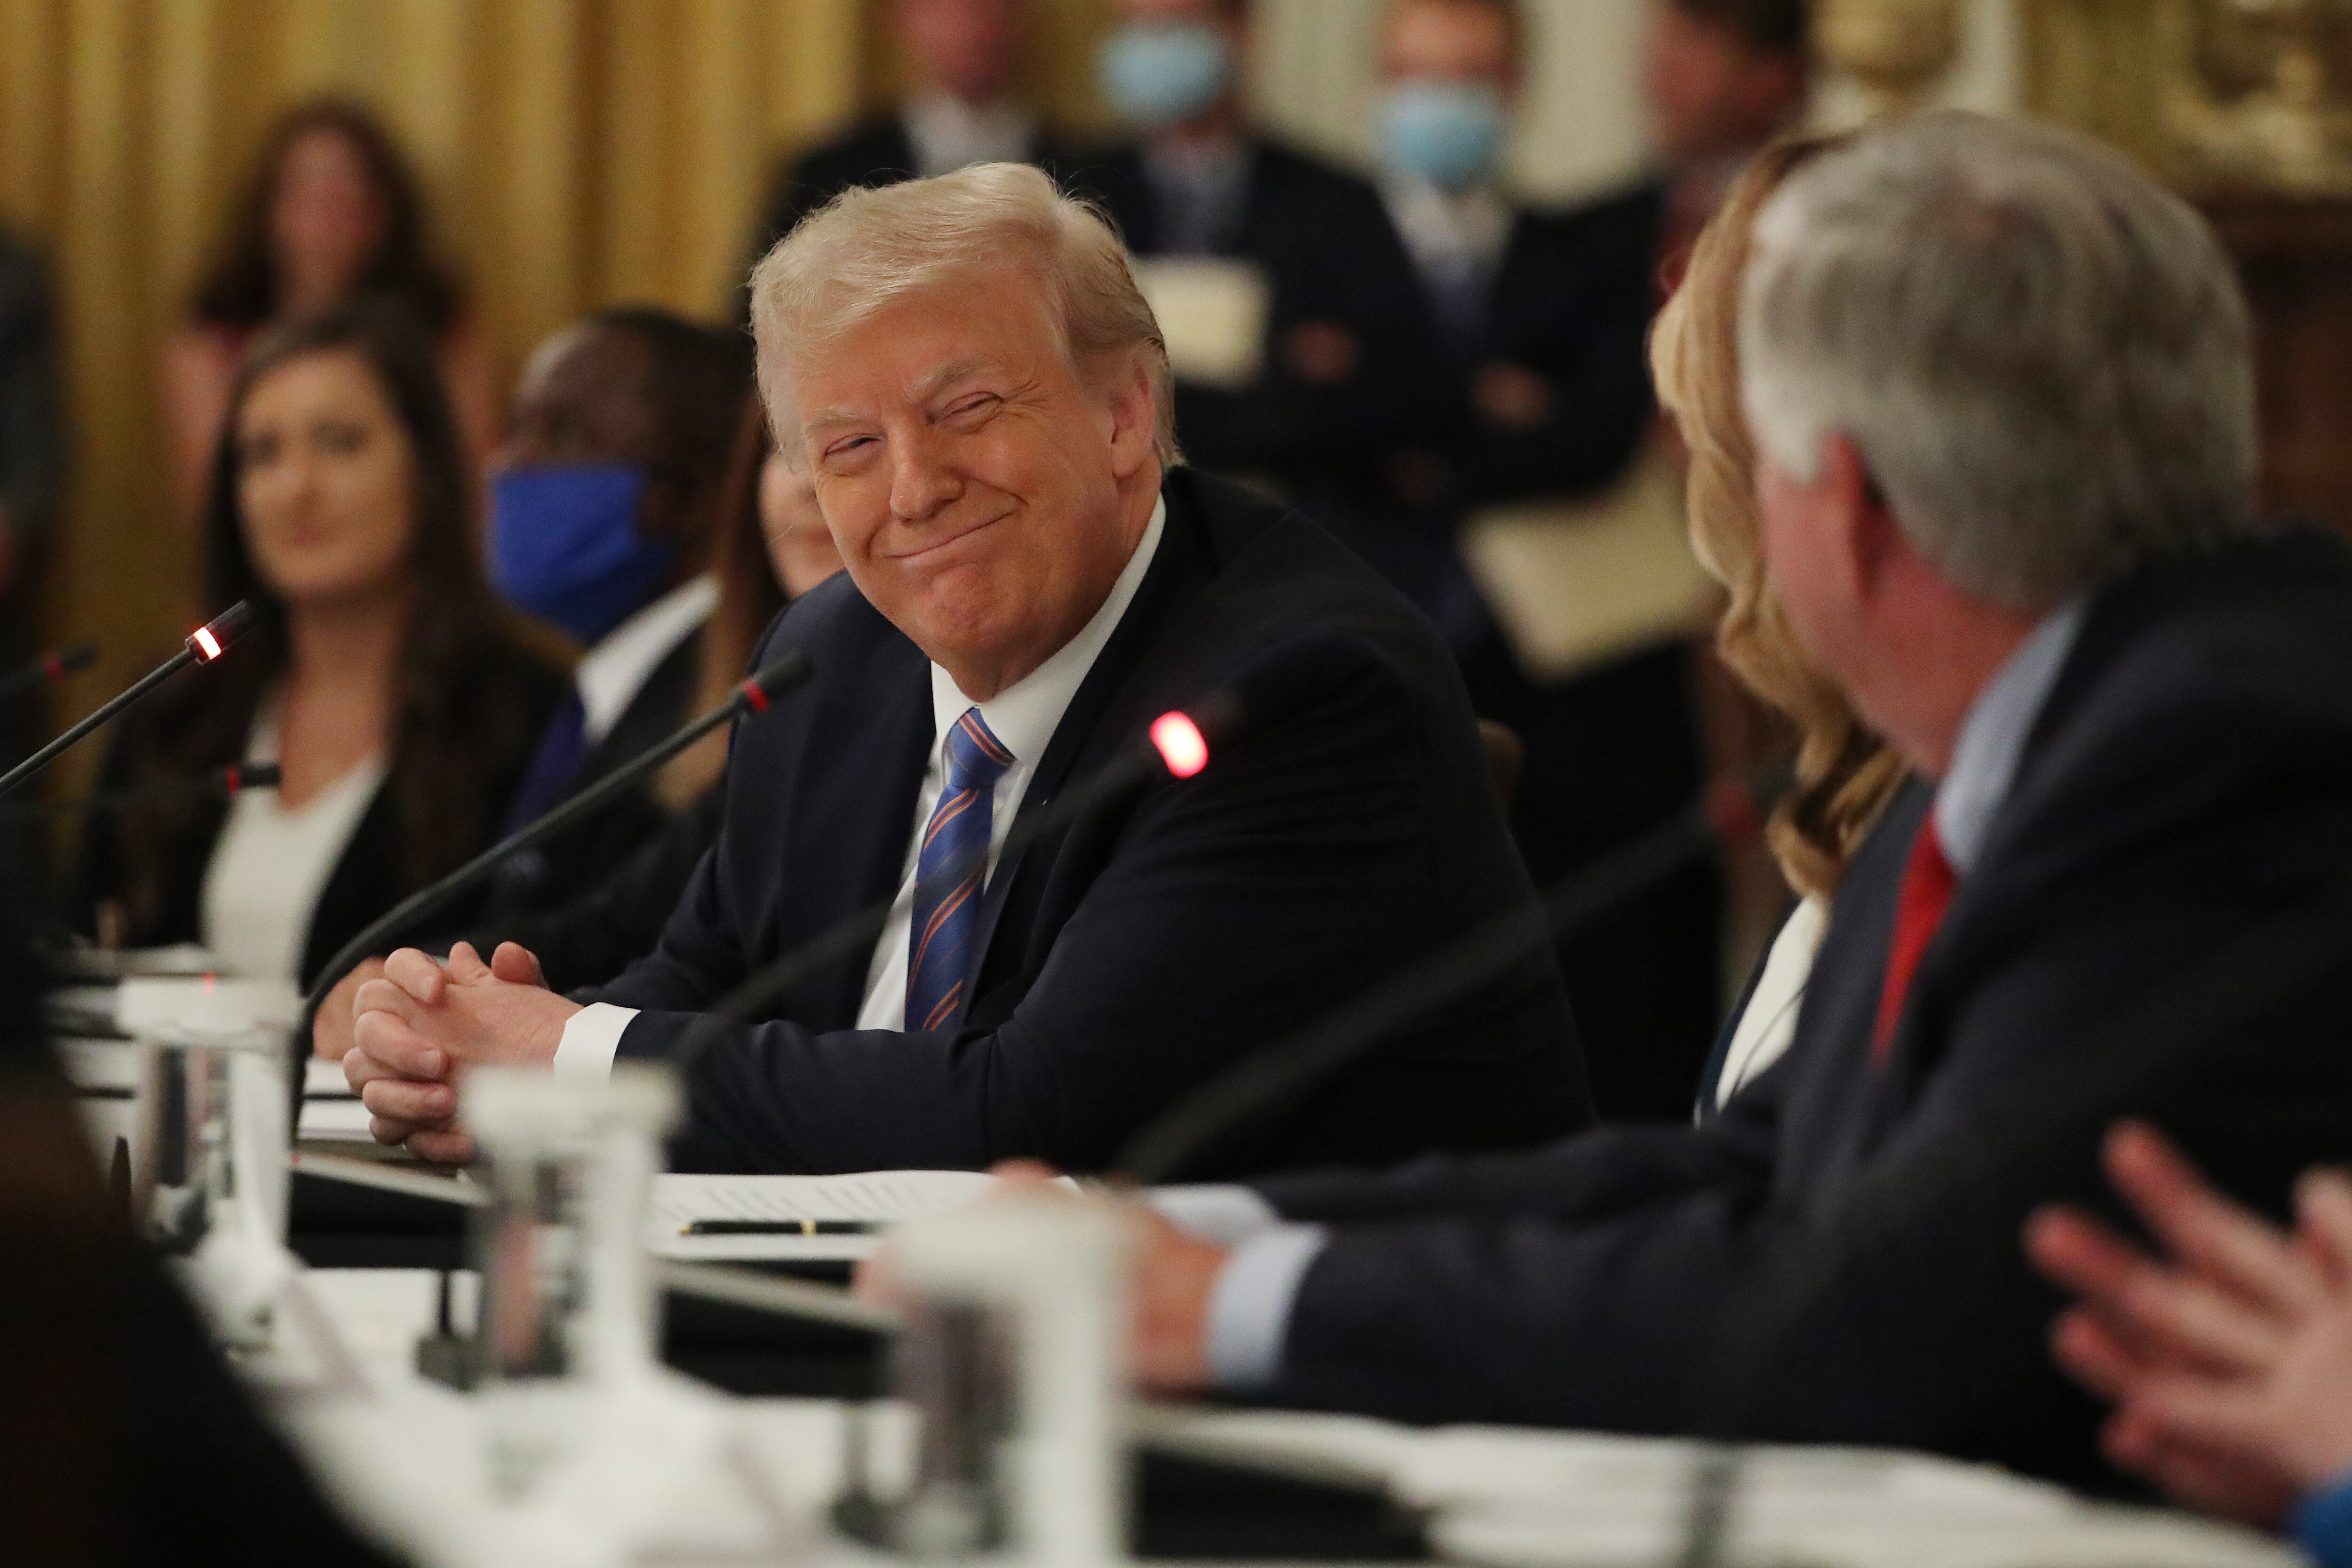 President Trump Participates In National Dialogue On Safely Reopening Nation’s Schools